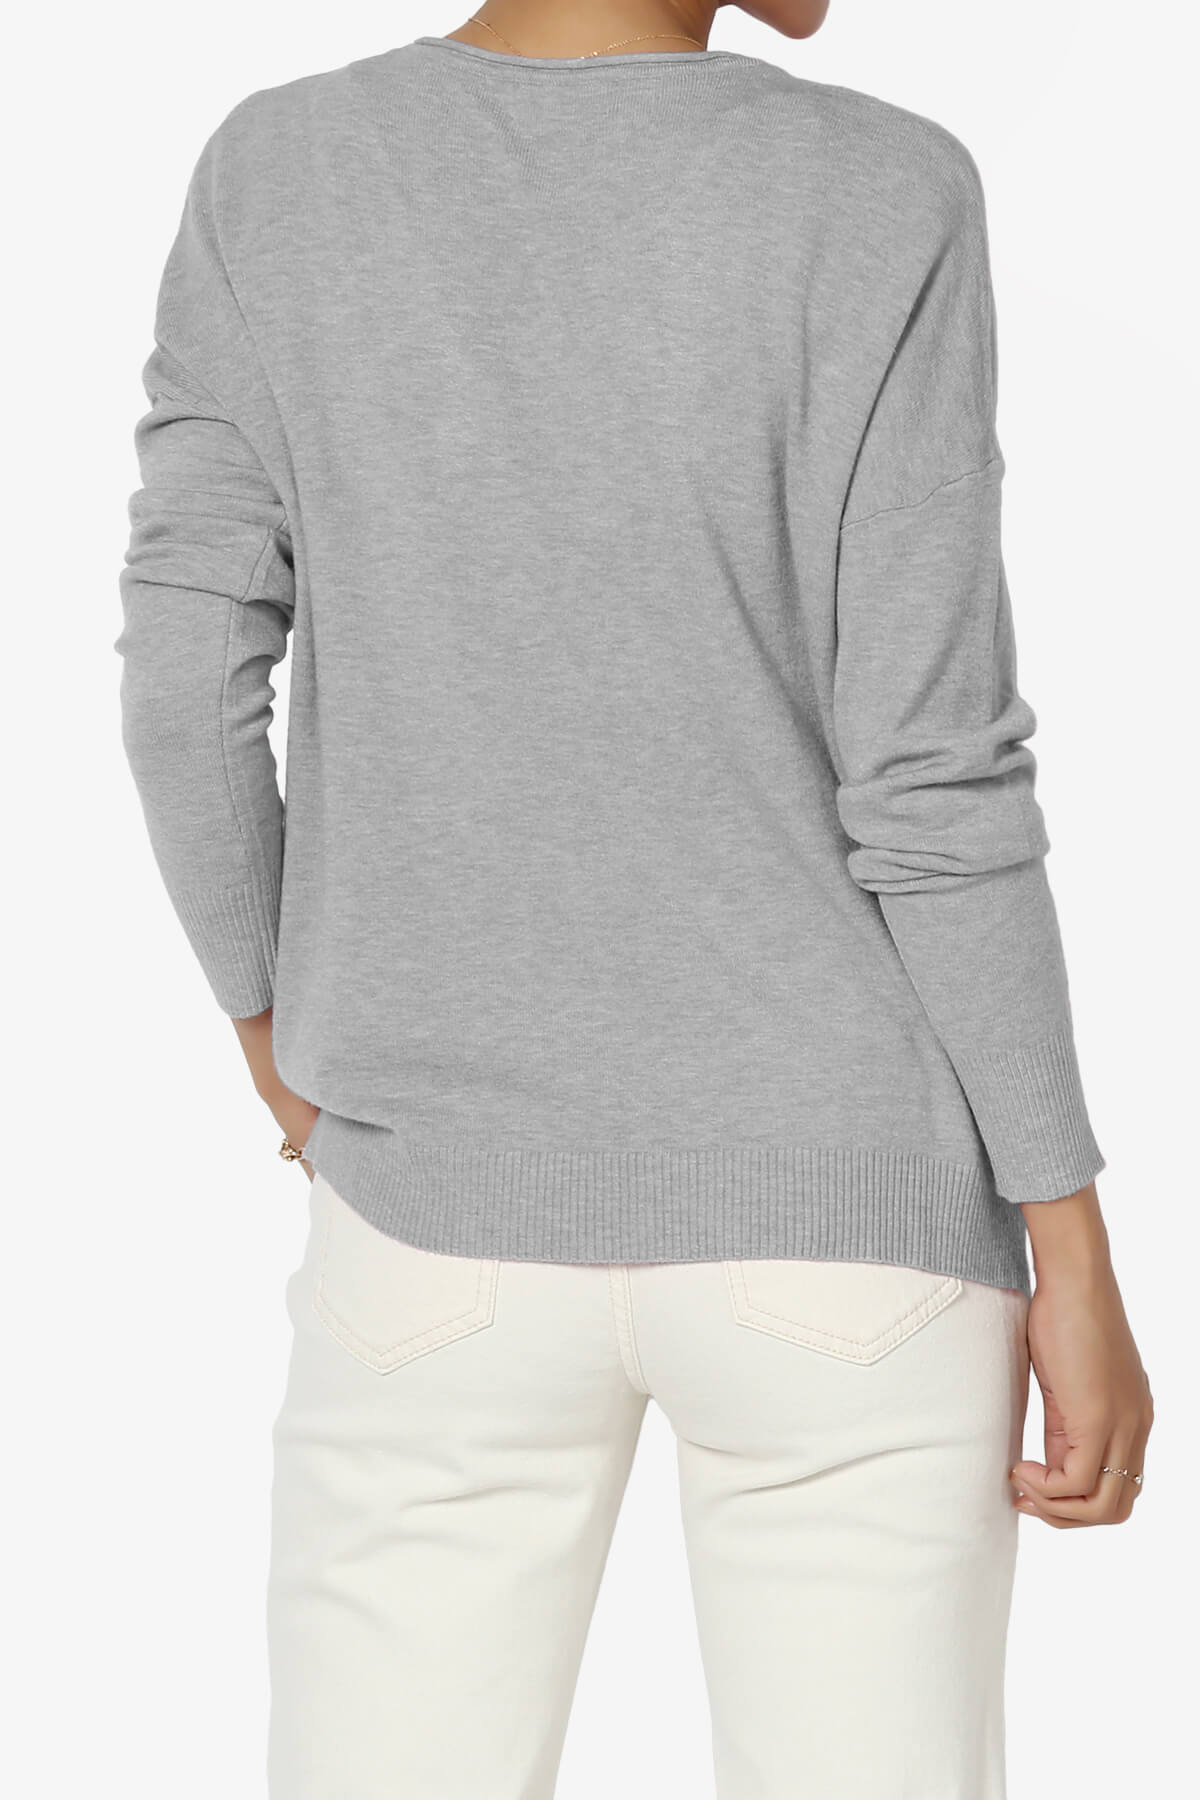 Carolina Long Sleeve Relaxed Fit Knit Top HEATHER GREY_2